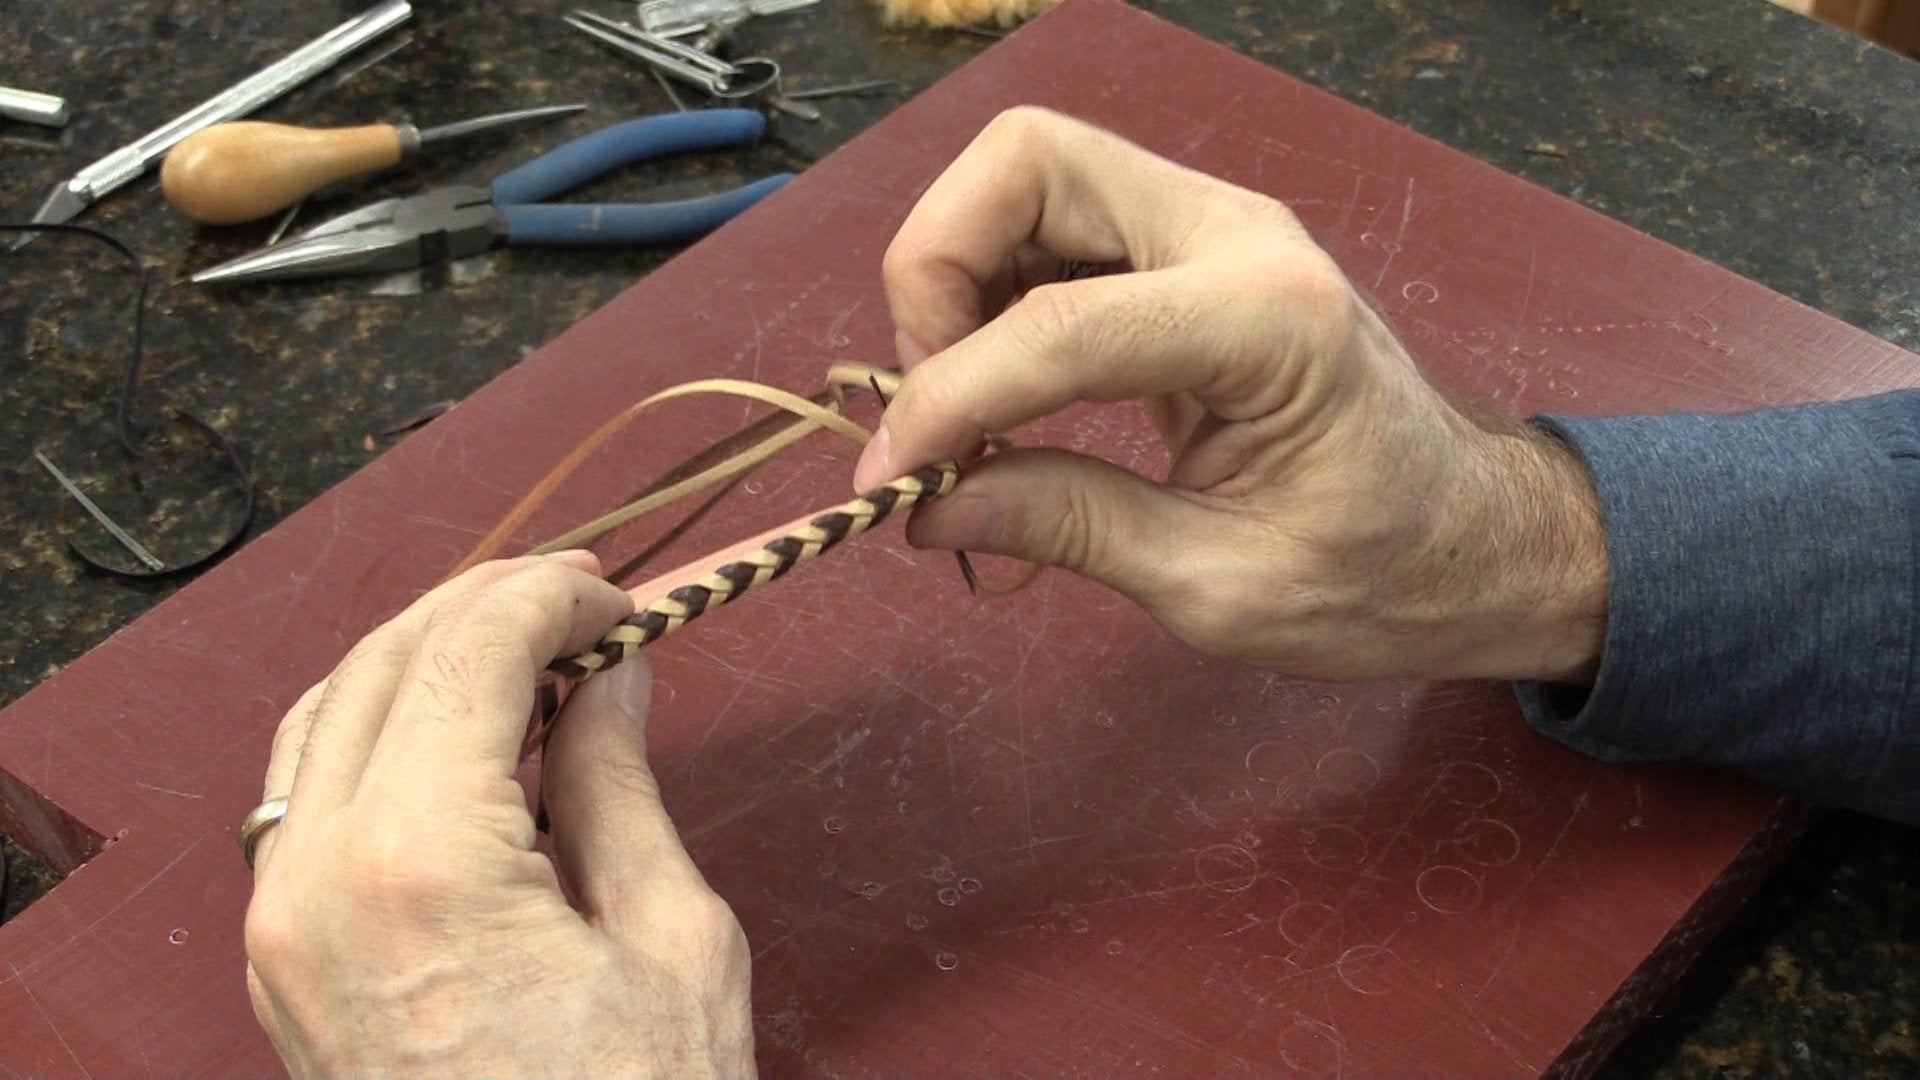 Braiding Leather Tutorial - How to Braid Leather With Three Laces